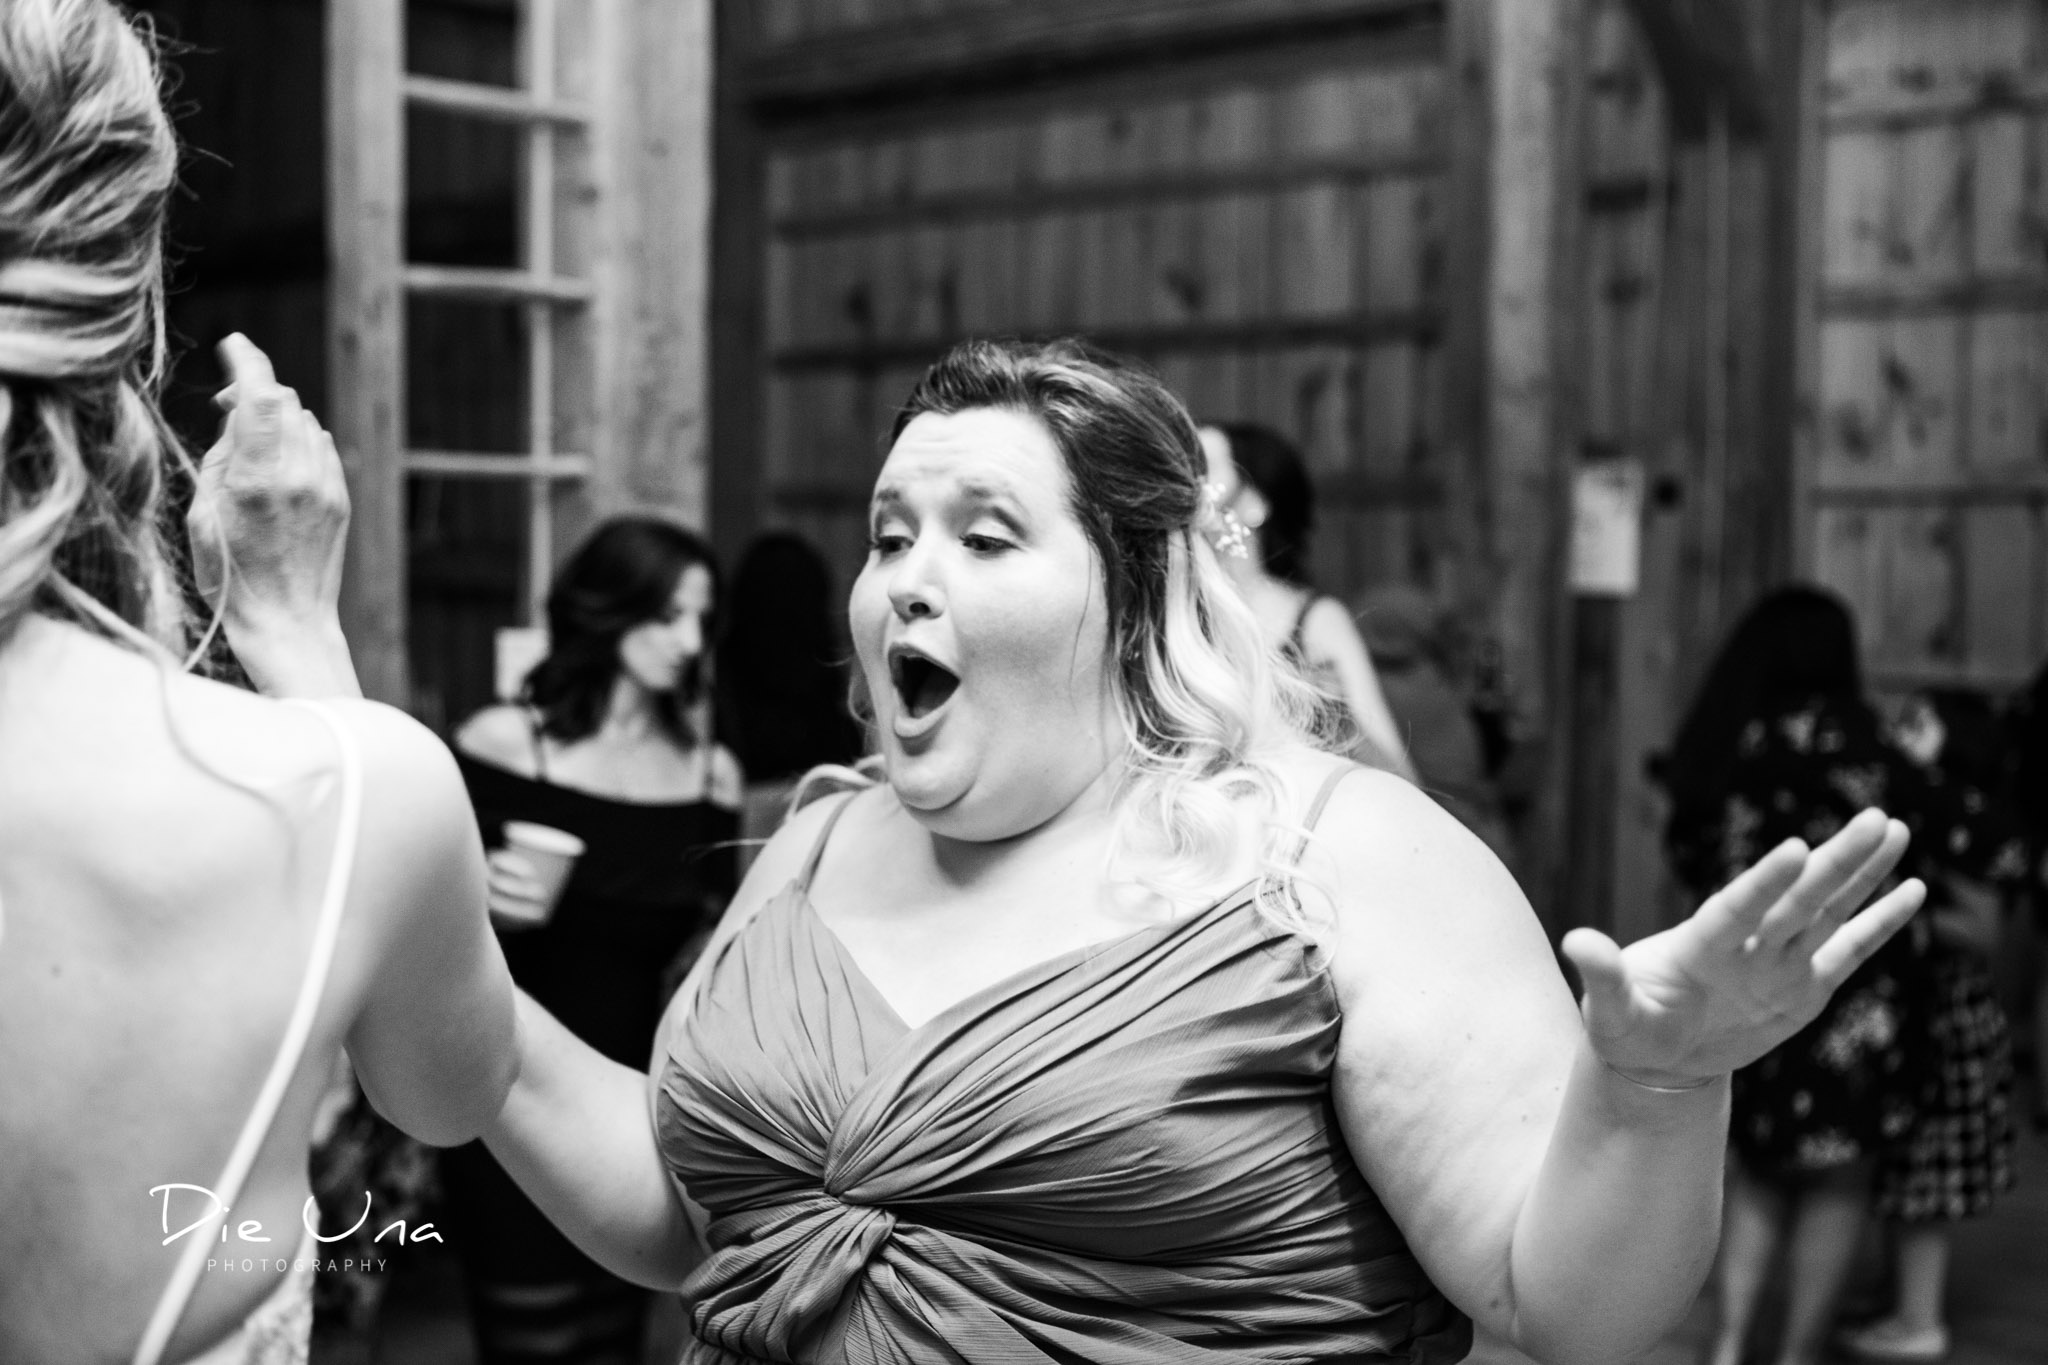 bridesmaid dancing during wedding dance reception black and white candid photography.jpg